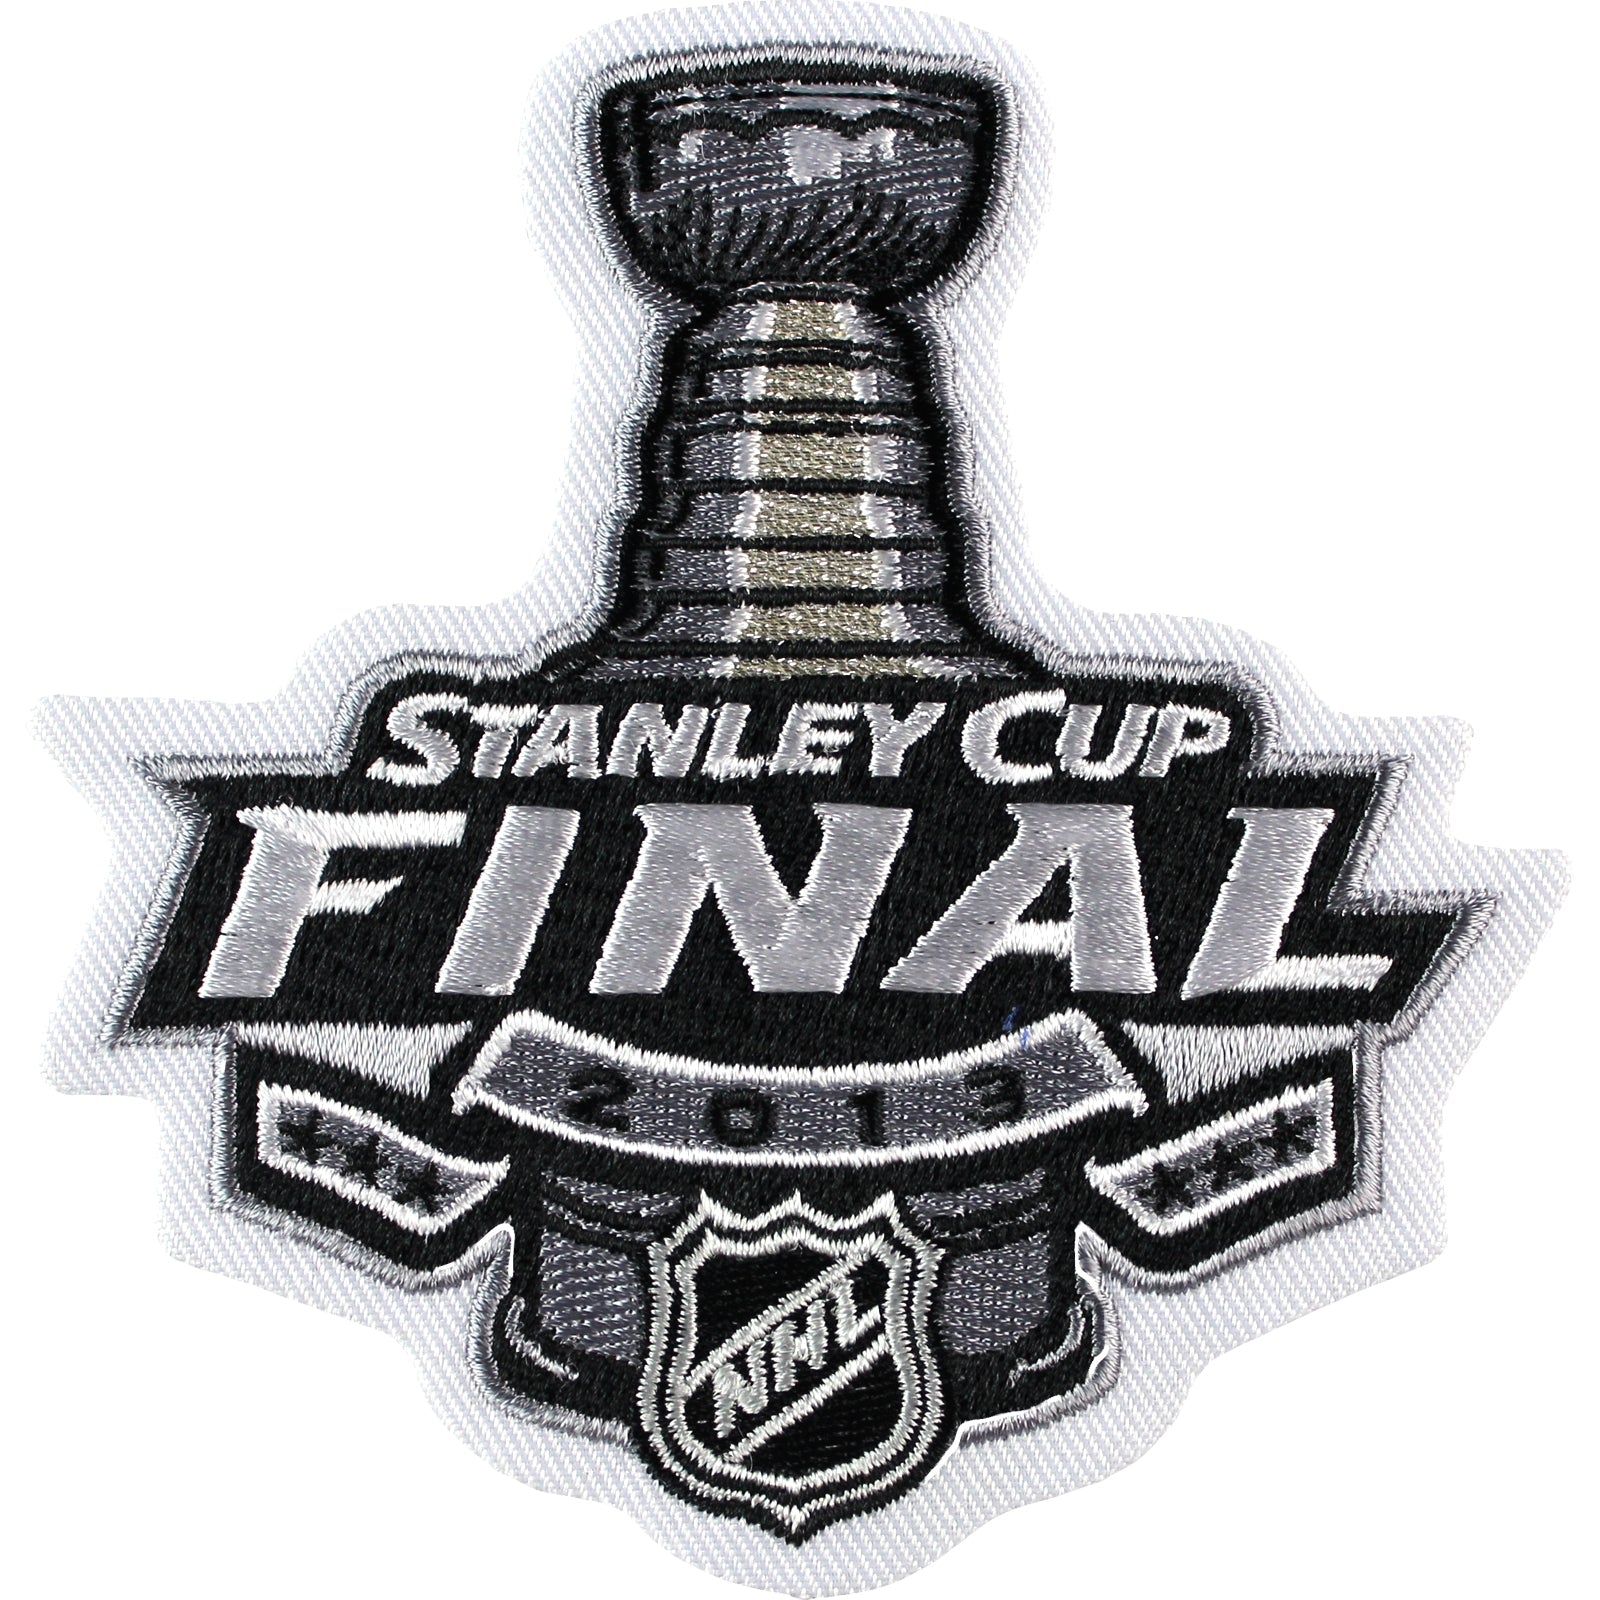 2004 STANLEY CUP FINAL PATCH